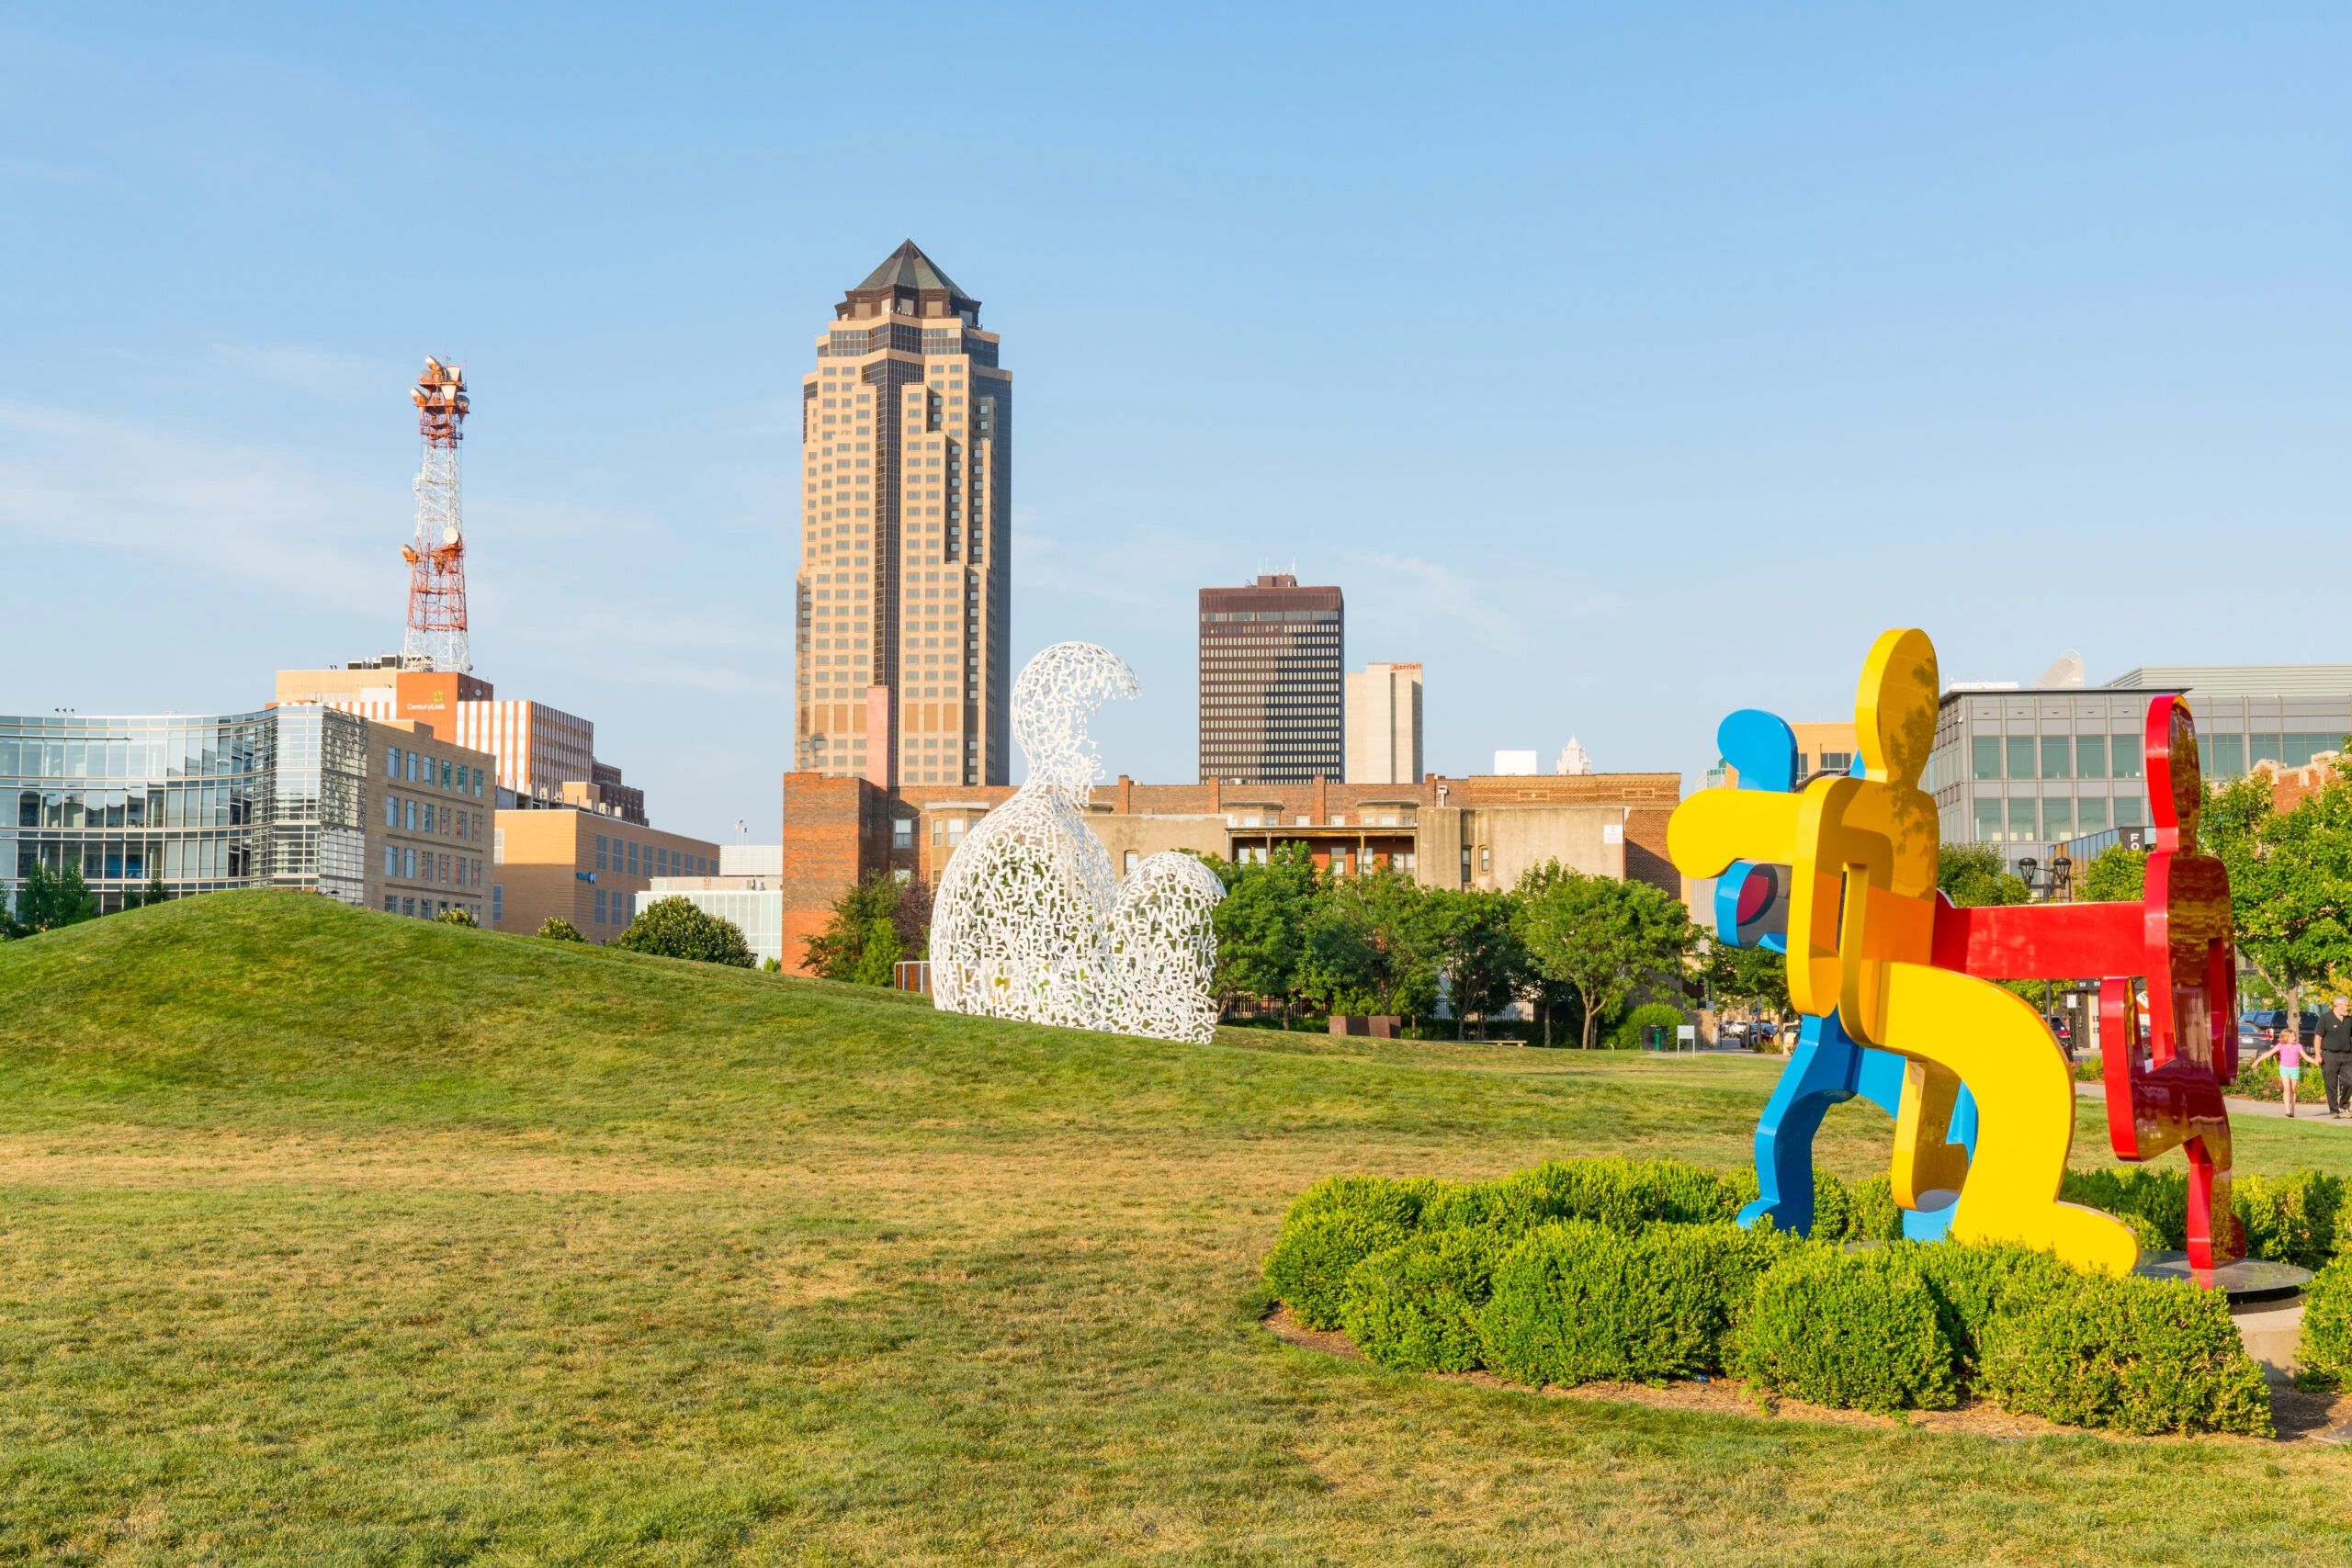 3 Fun Things to Do in Des Moines